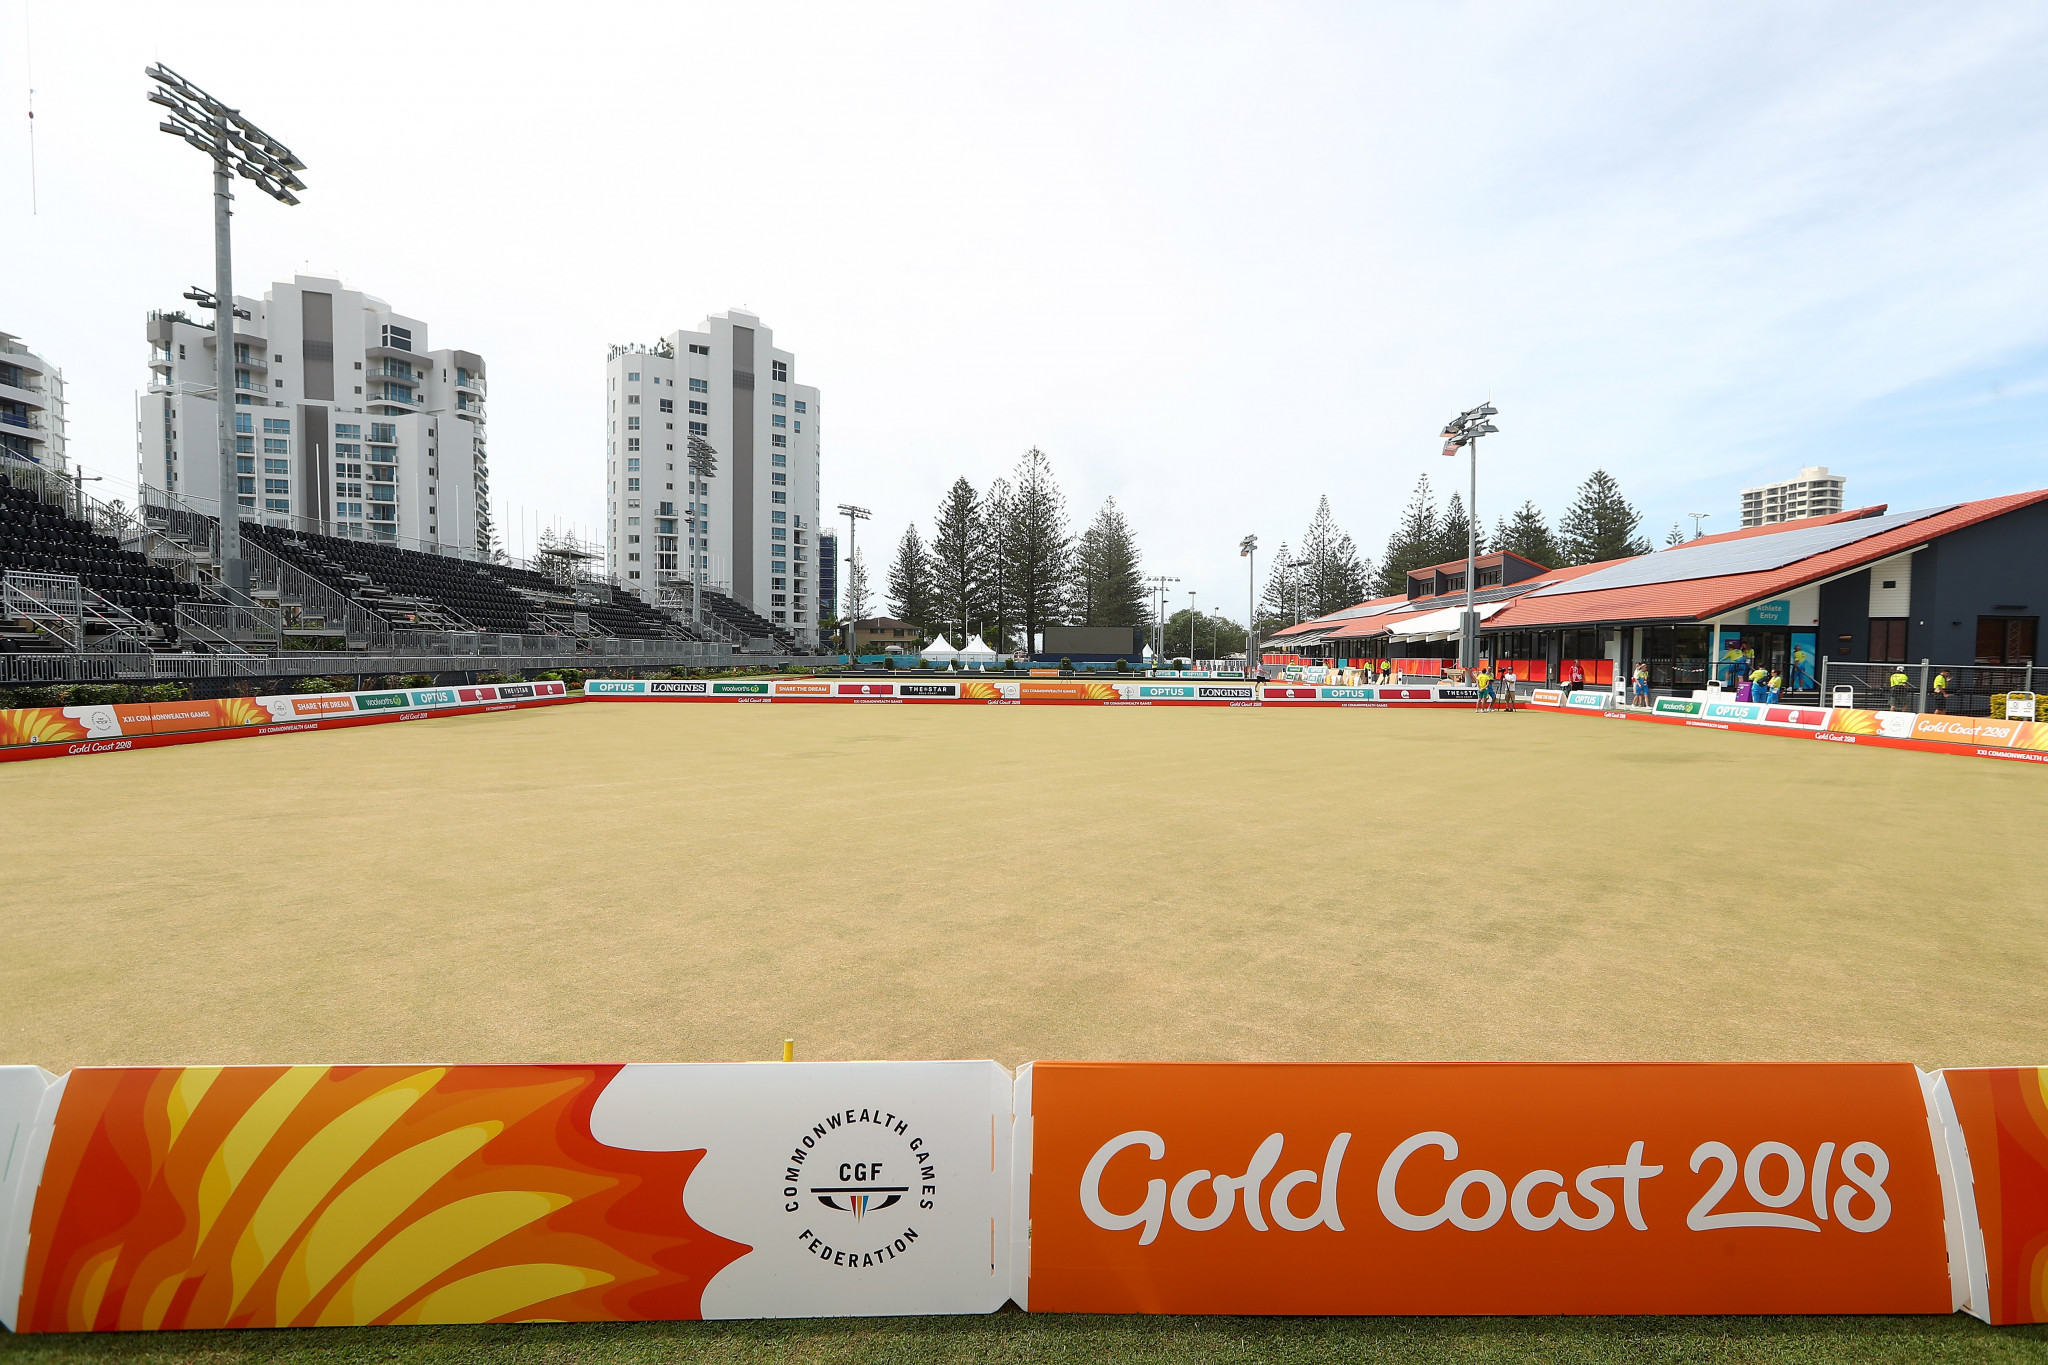 Gold Coast 2018 promise entertainment for spectators watching lawn bowls events at Commonwealth Games